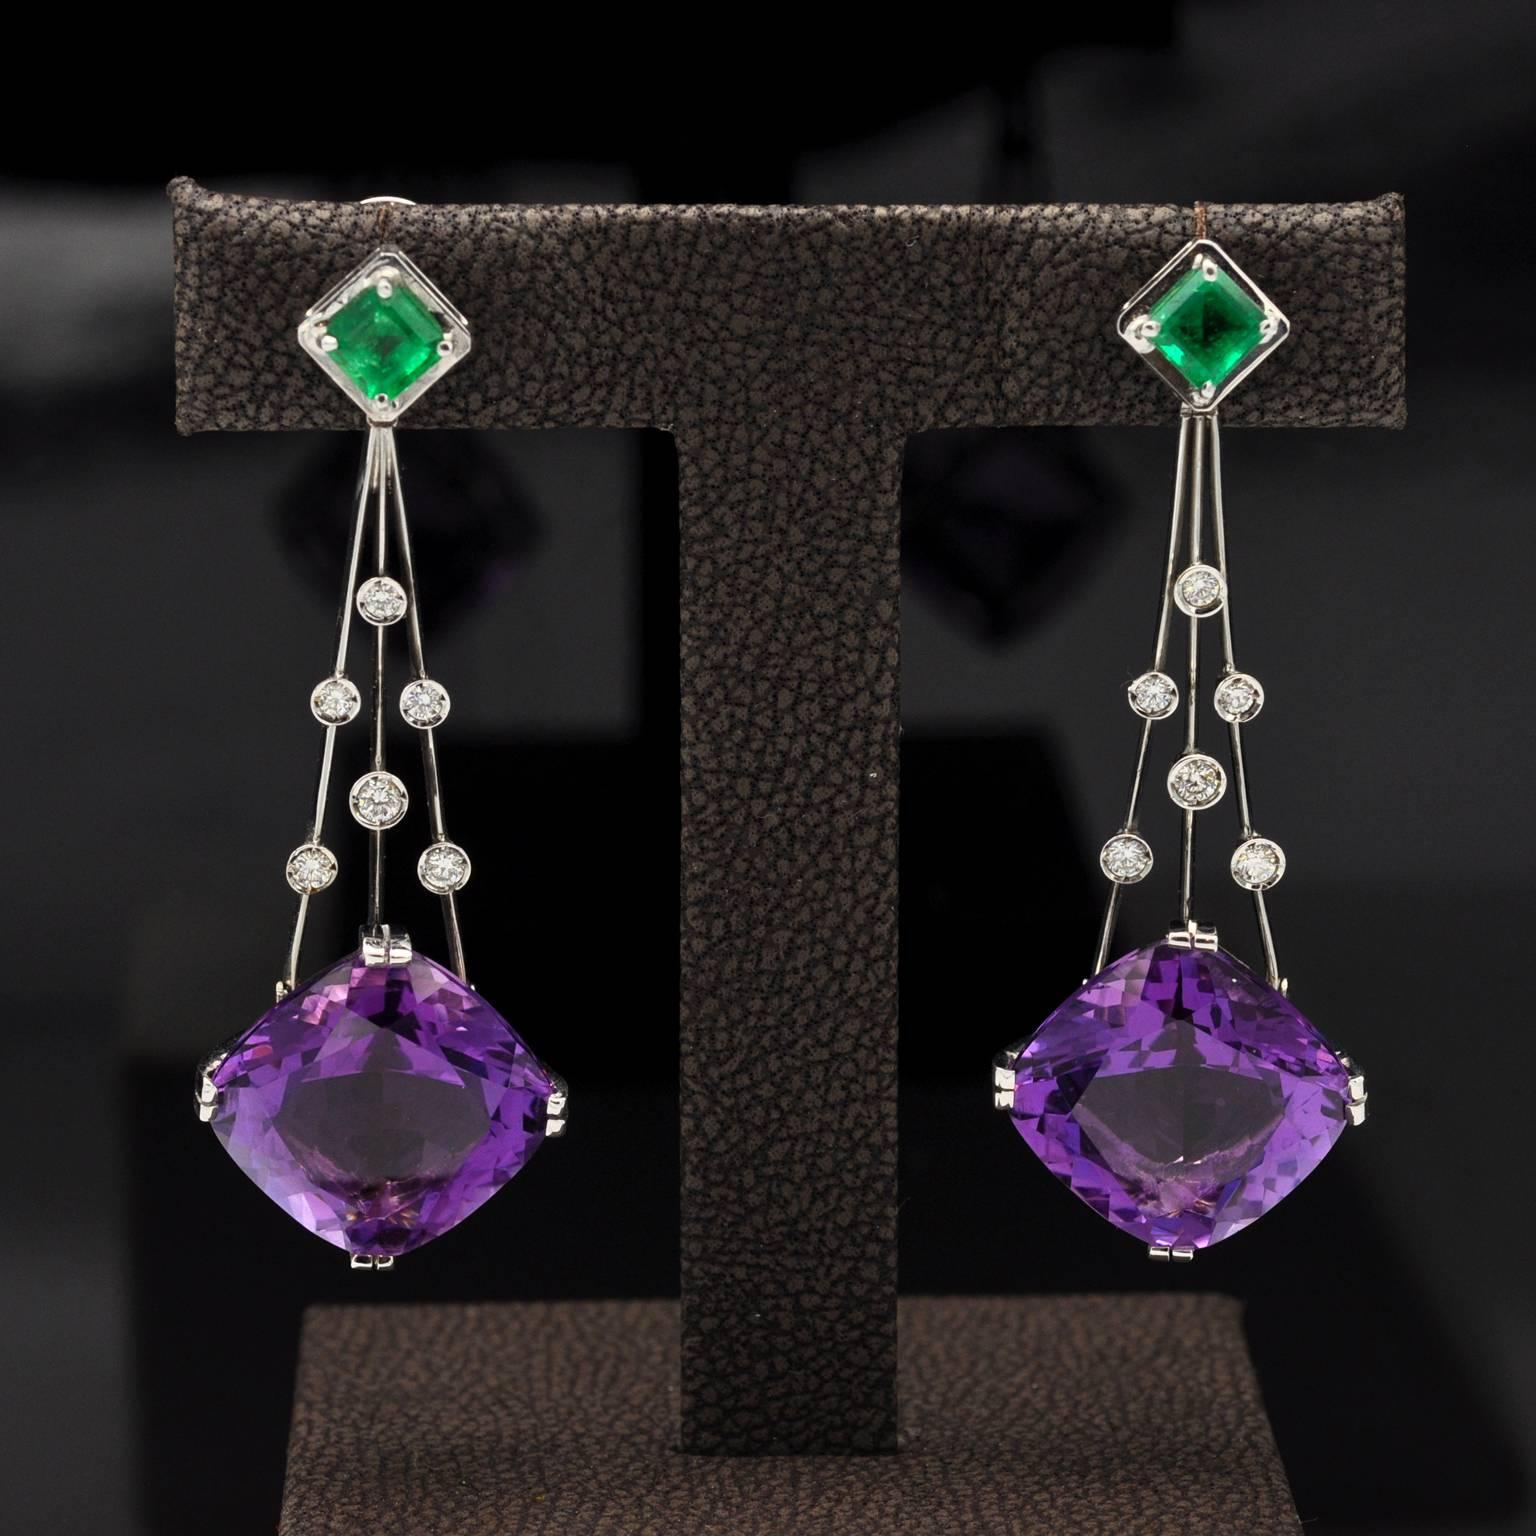 Stunning dangle Earrings set with two cushion shaped amethysts and two square Colombian emeralds. in between on three white gold lines, diamonds highlight the beauty of the piece like droplets on a web.

Amethyst : 24,73 Carats, Emeralds: 1,13